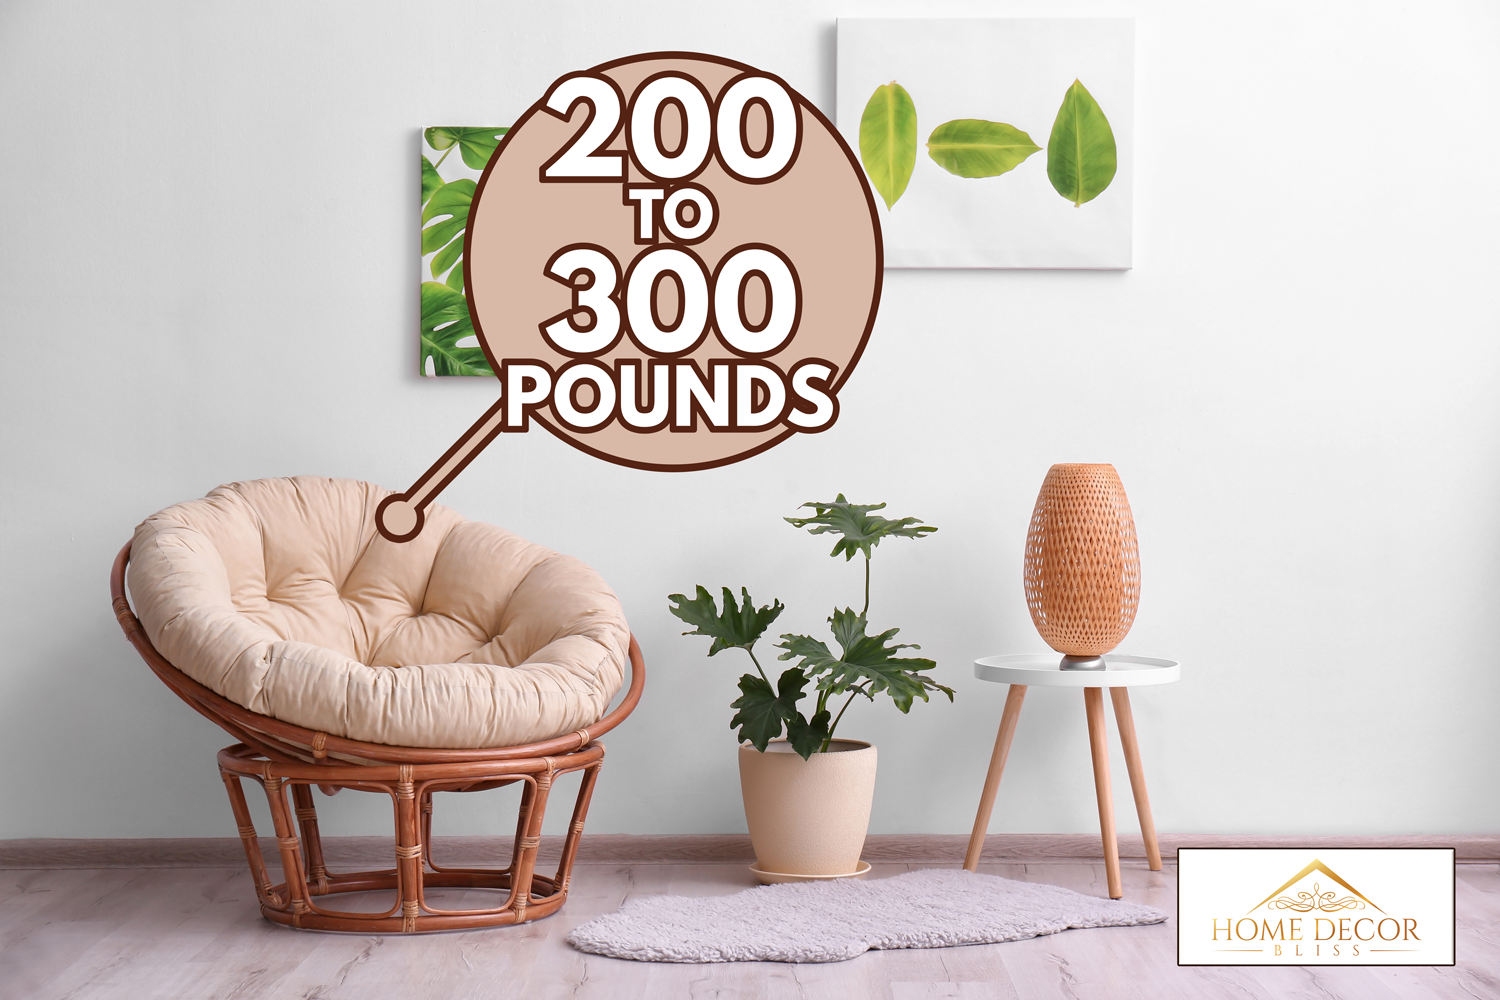 Stylish room interior with tropical leaves and papasan chair - How Much Weight Can A Papasan Chair Hold